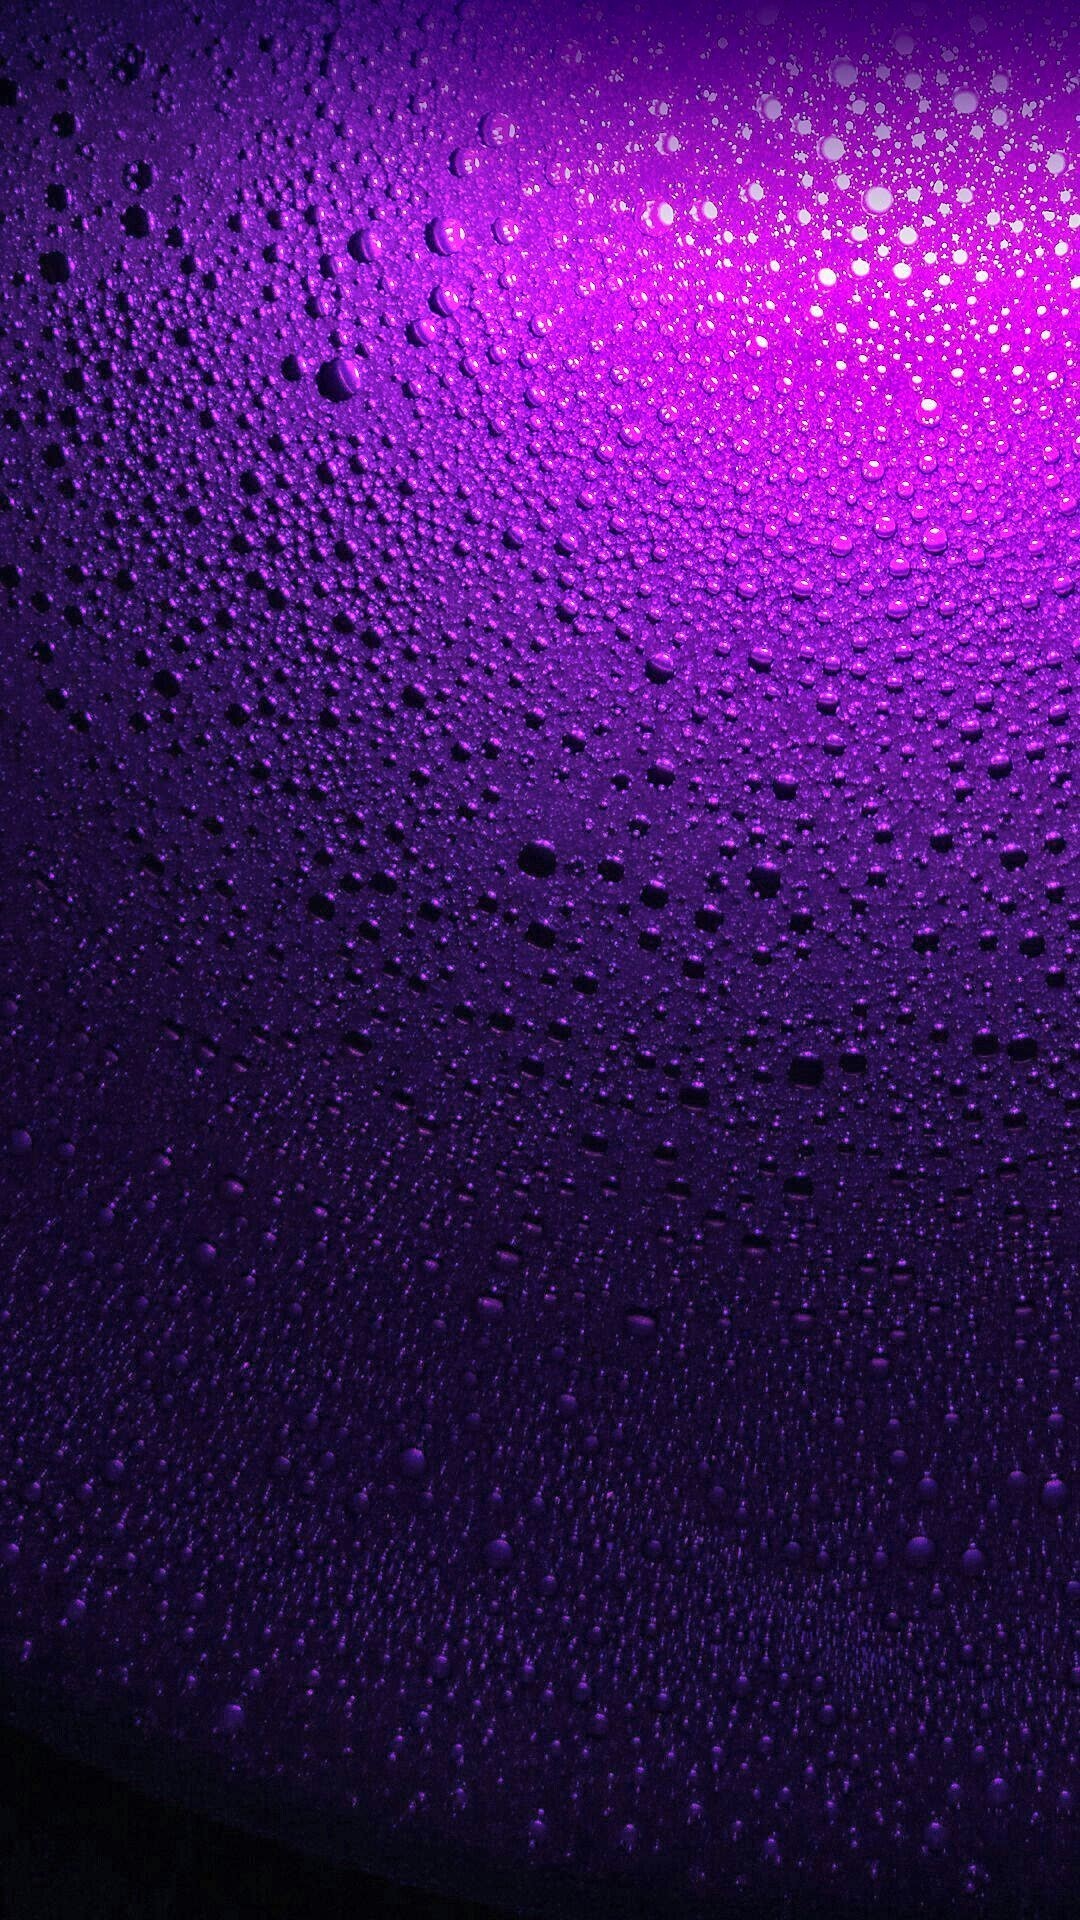 1080x1920  Purple Backgrounds, Iphone Backgrounds, Phone Wallpapers, Galaxy  S7, Samsung